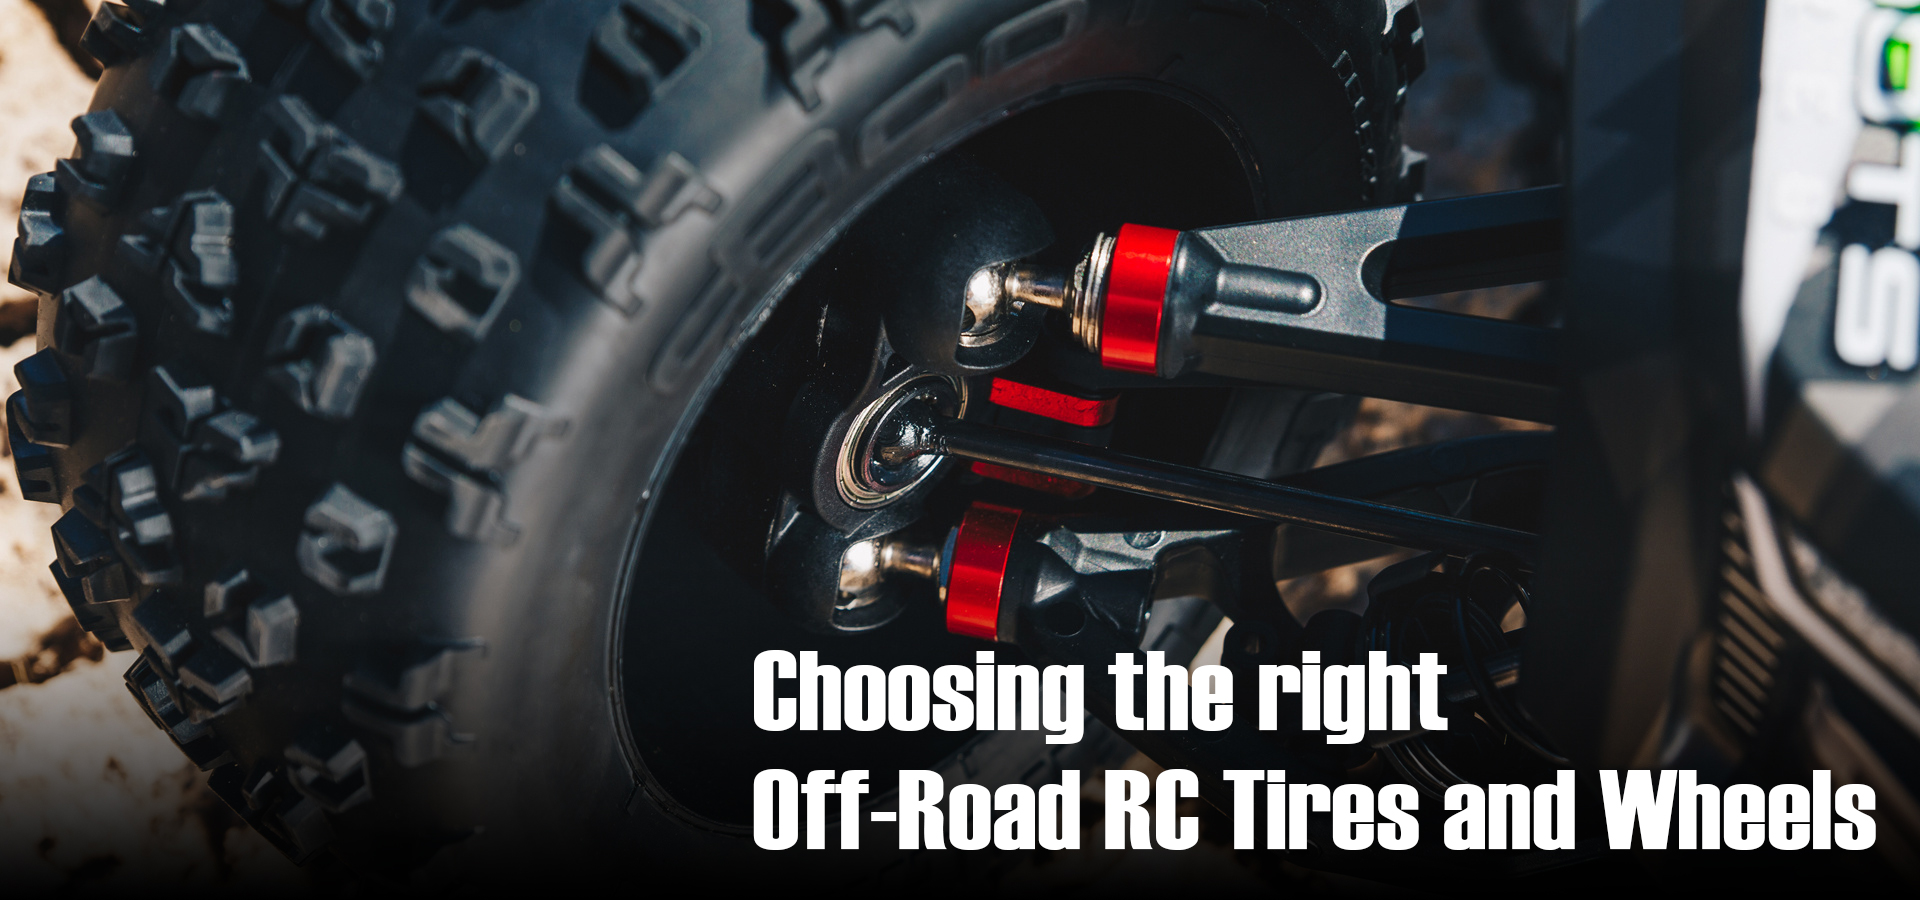 Choosing the Right Off-Road RC Tires and Wheels